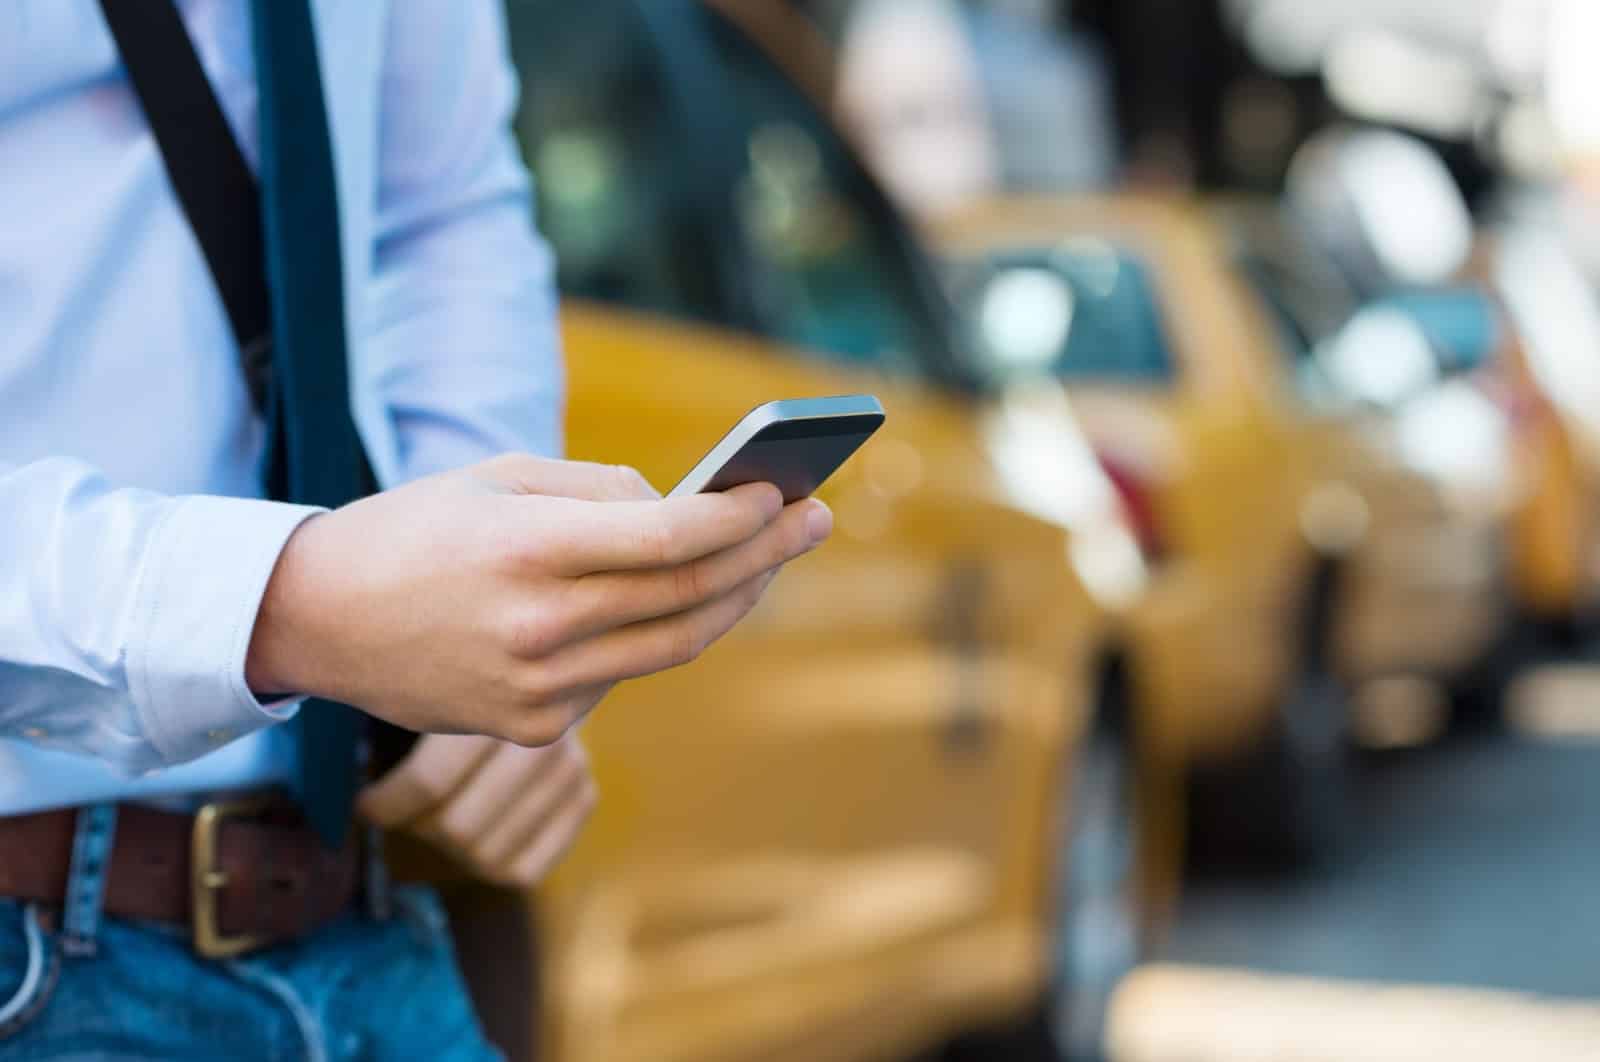 Curb promo code: A person uses his smartphone with taxis in the background